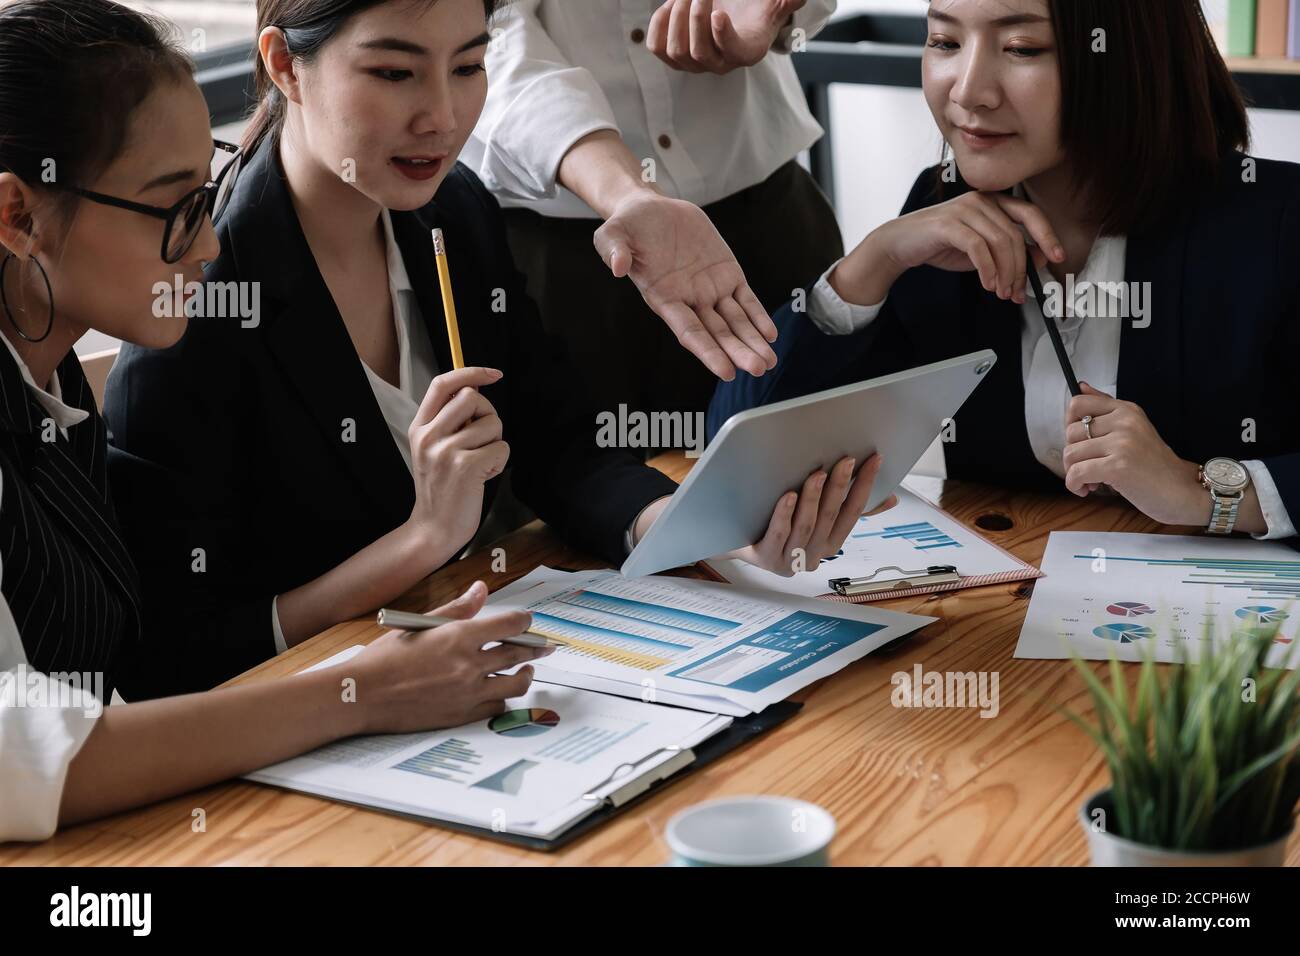 Young of Business People Meeting Conference Discussion Corporate Concept Stock Photo